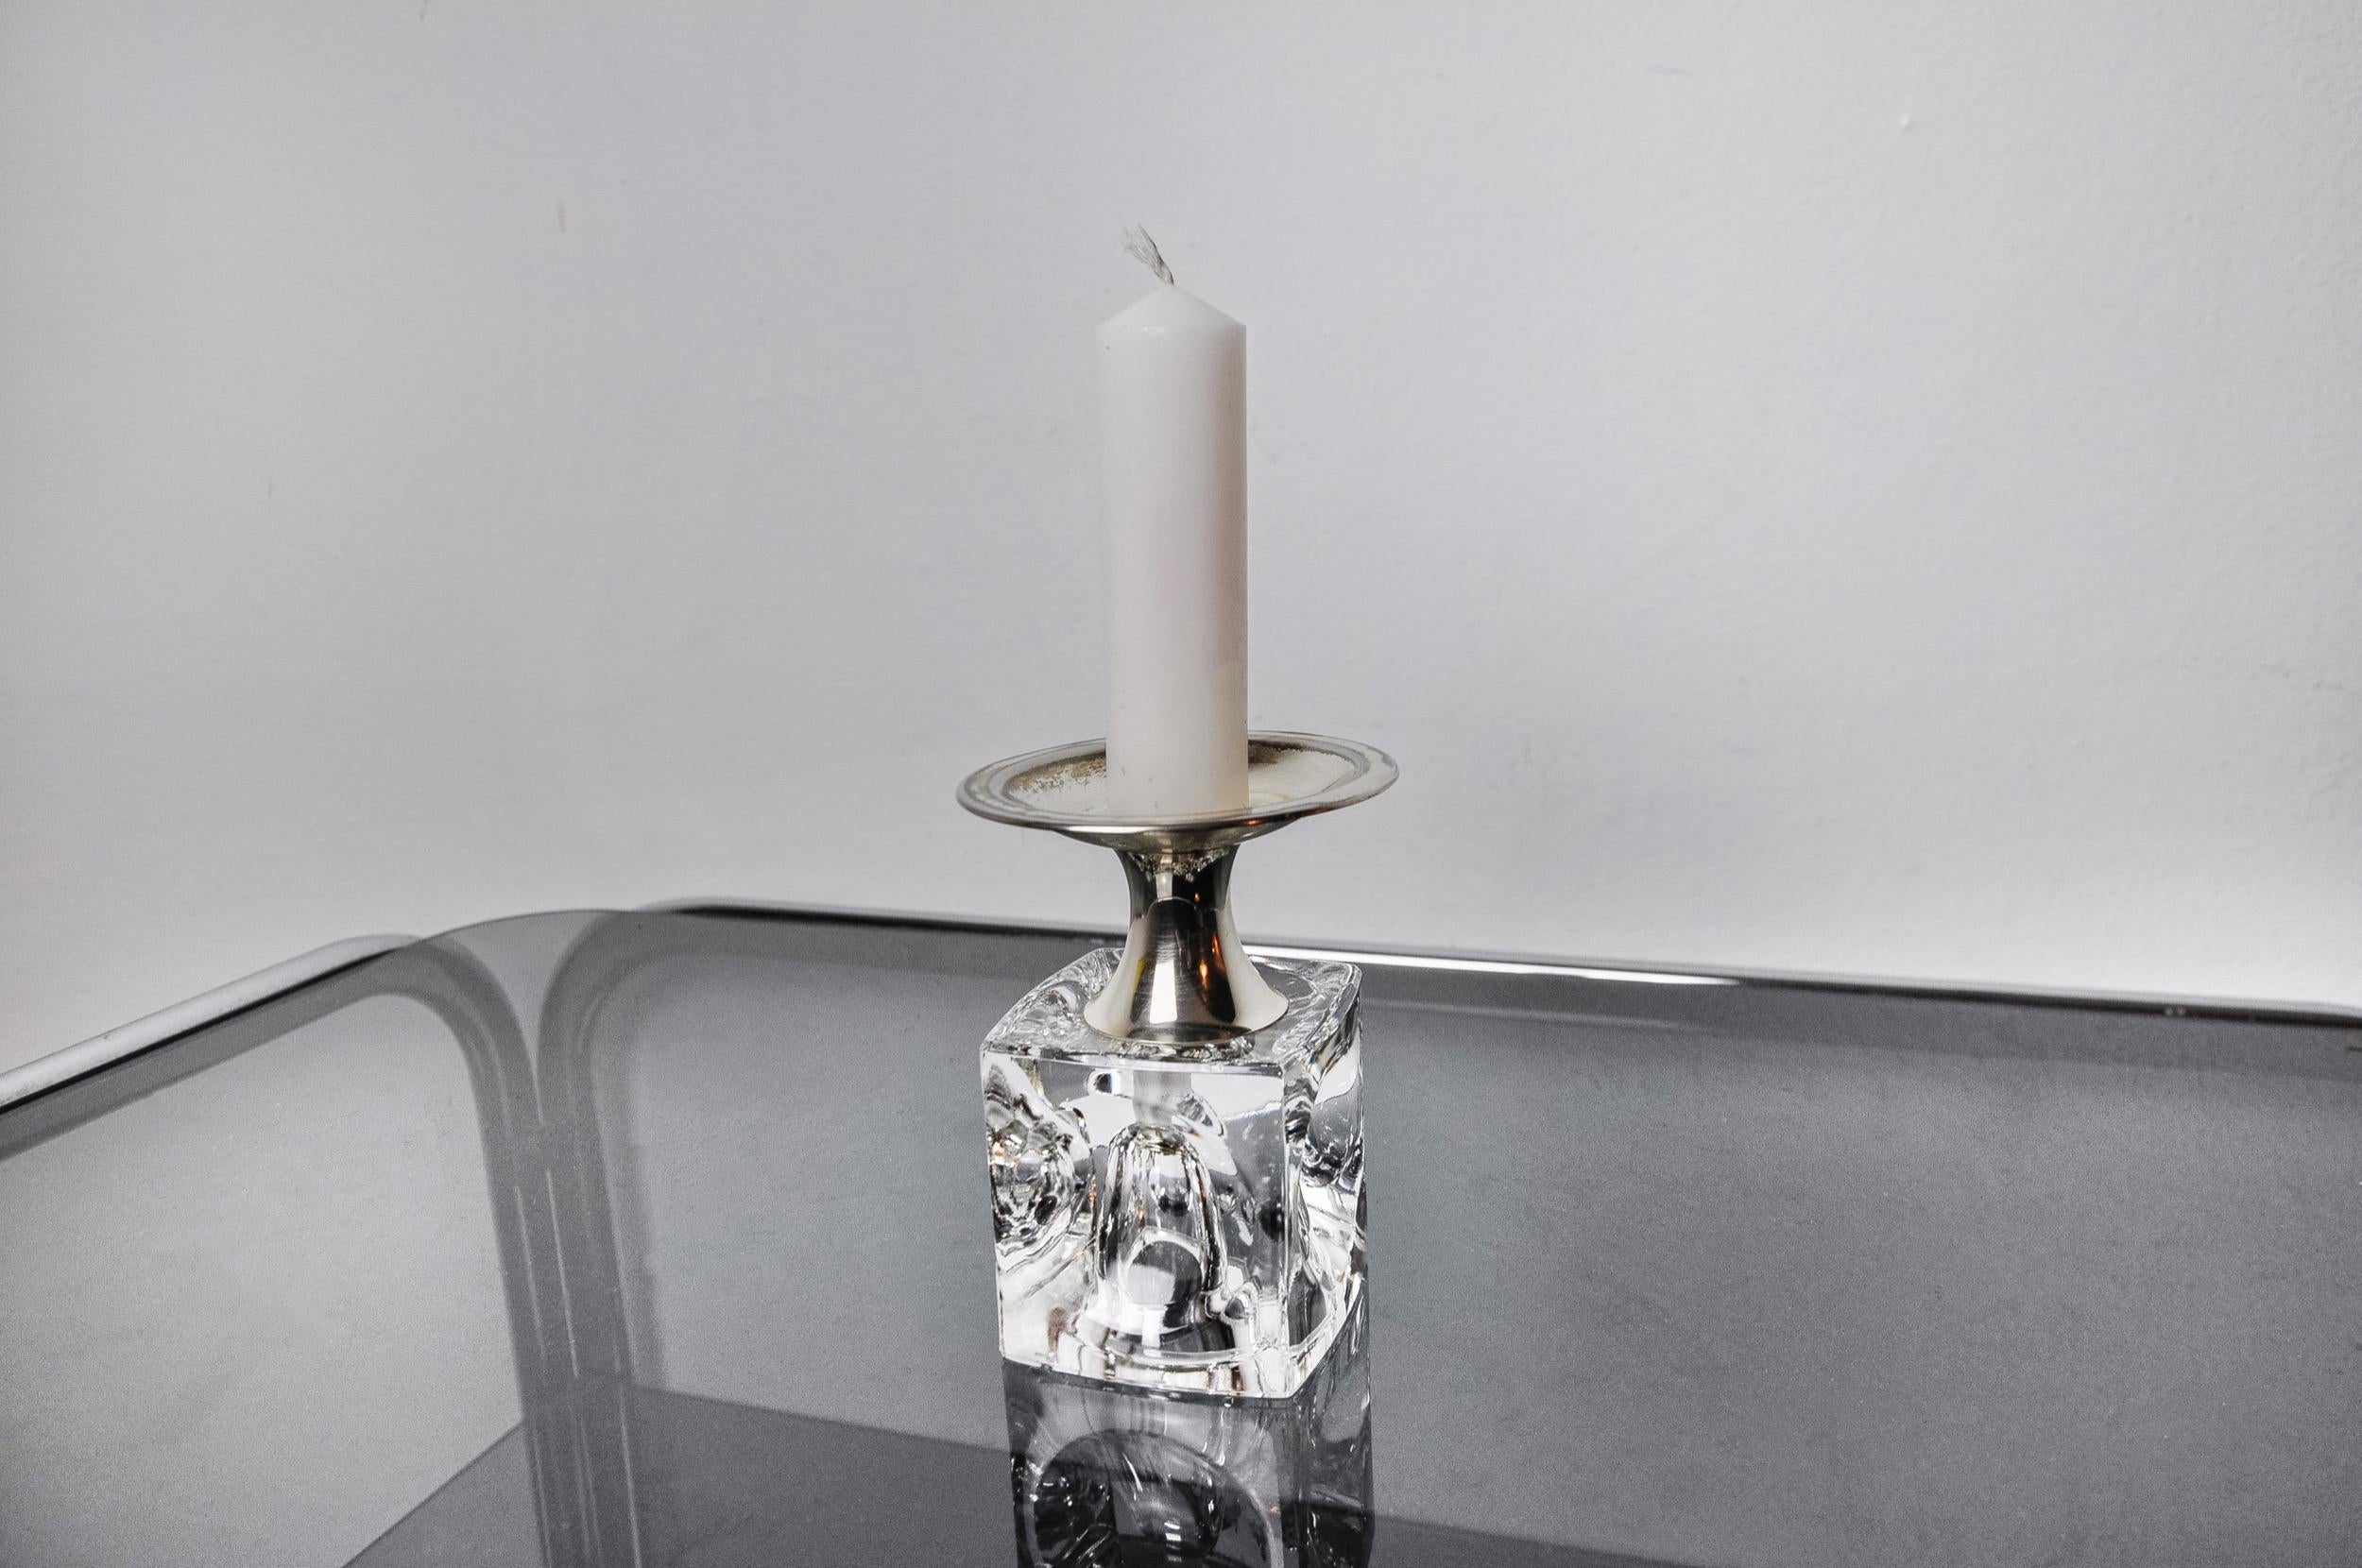 Superb ice cube candle holder by peill & putzler designed and produced in germany in the 1970s.

Blown glass structure and silver metal structure.

Superb design object that will decorate your interior perfectly.

Ref: 964.